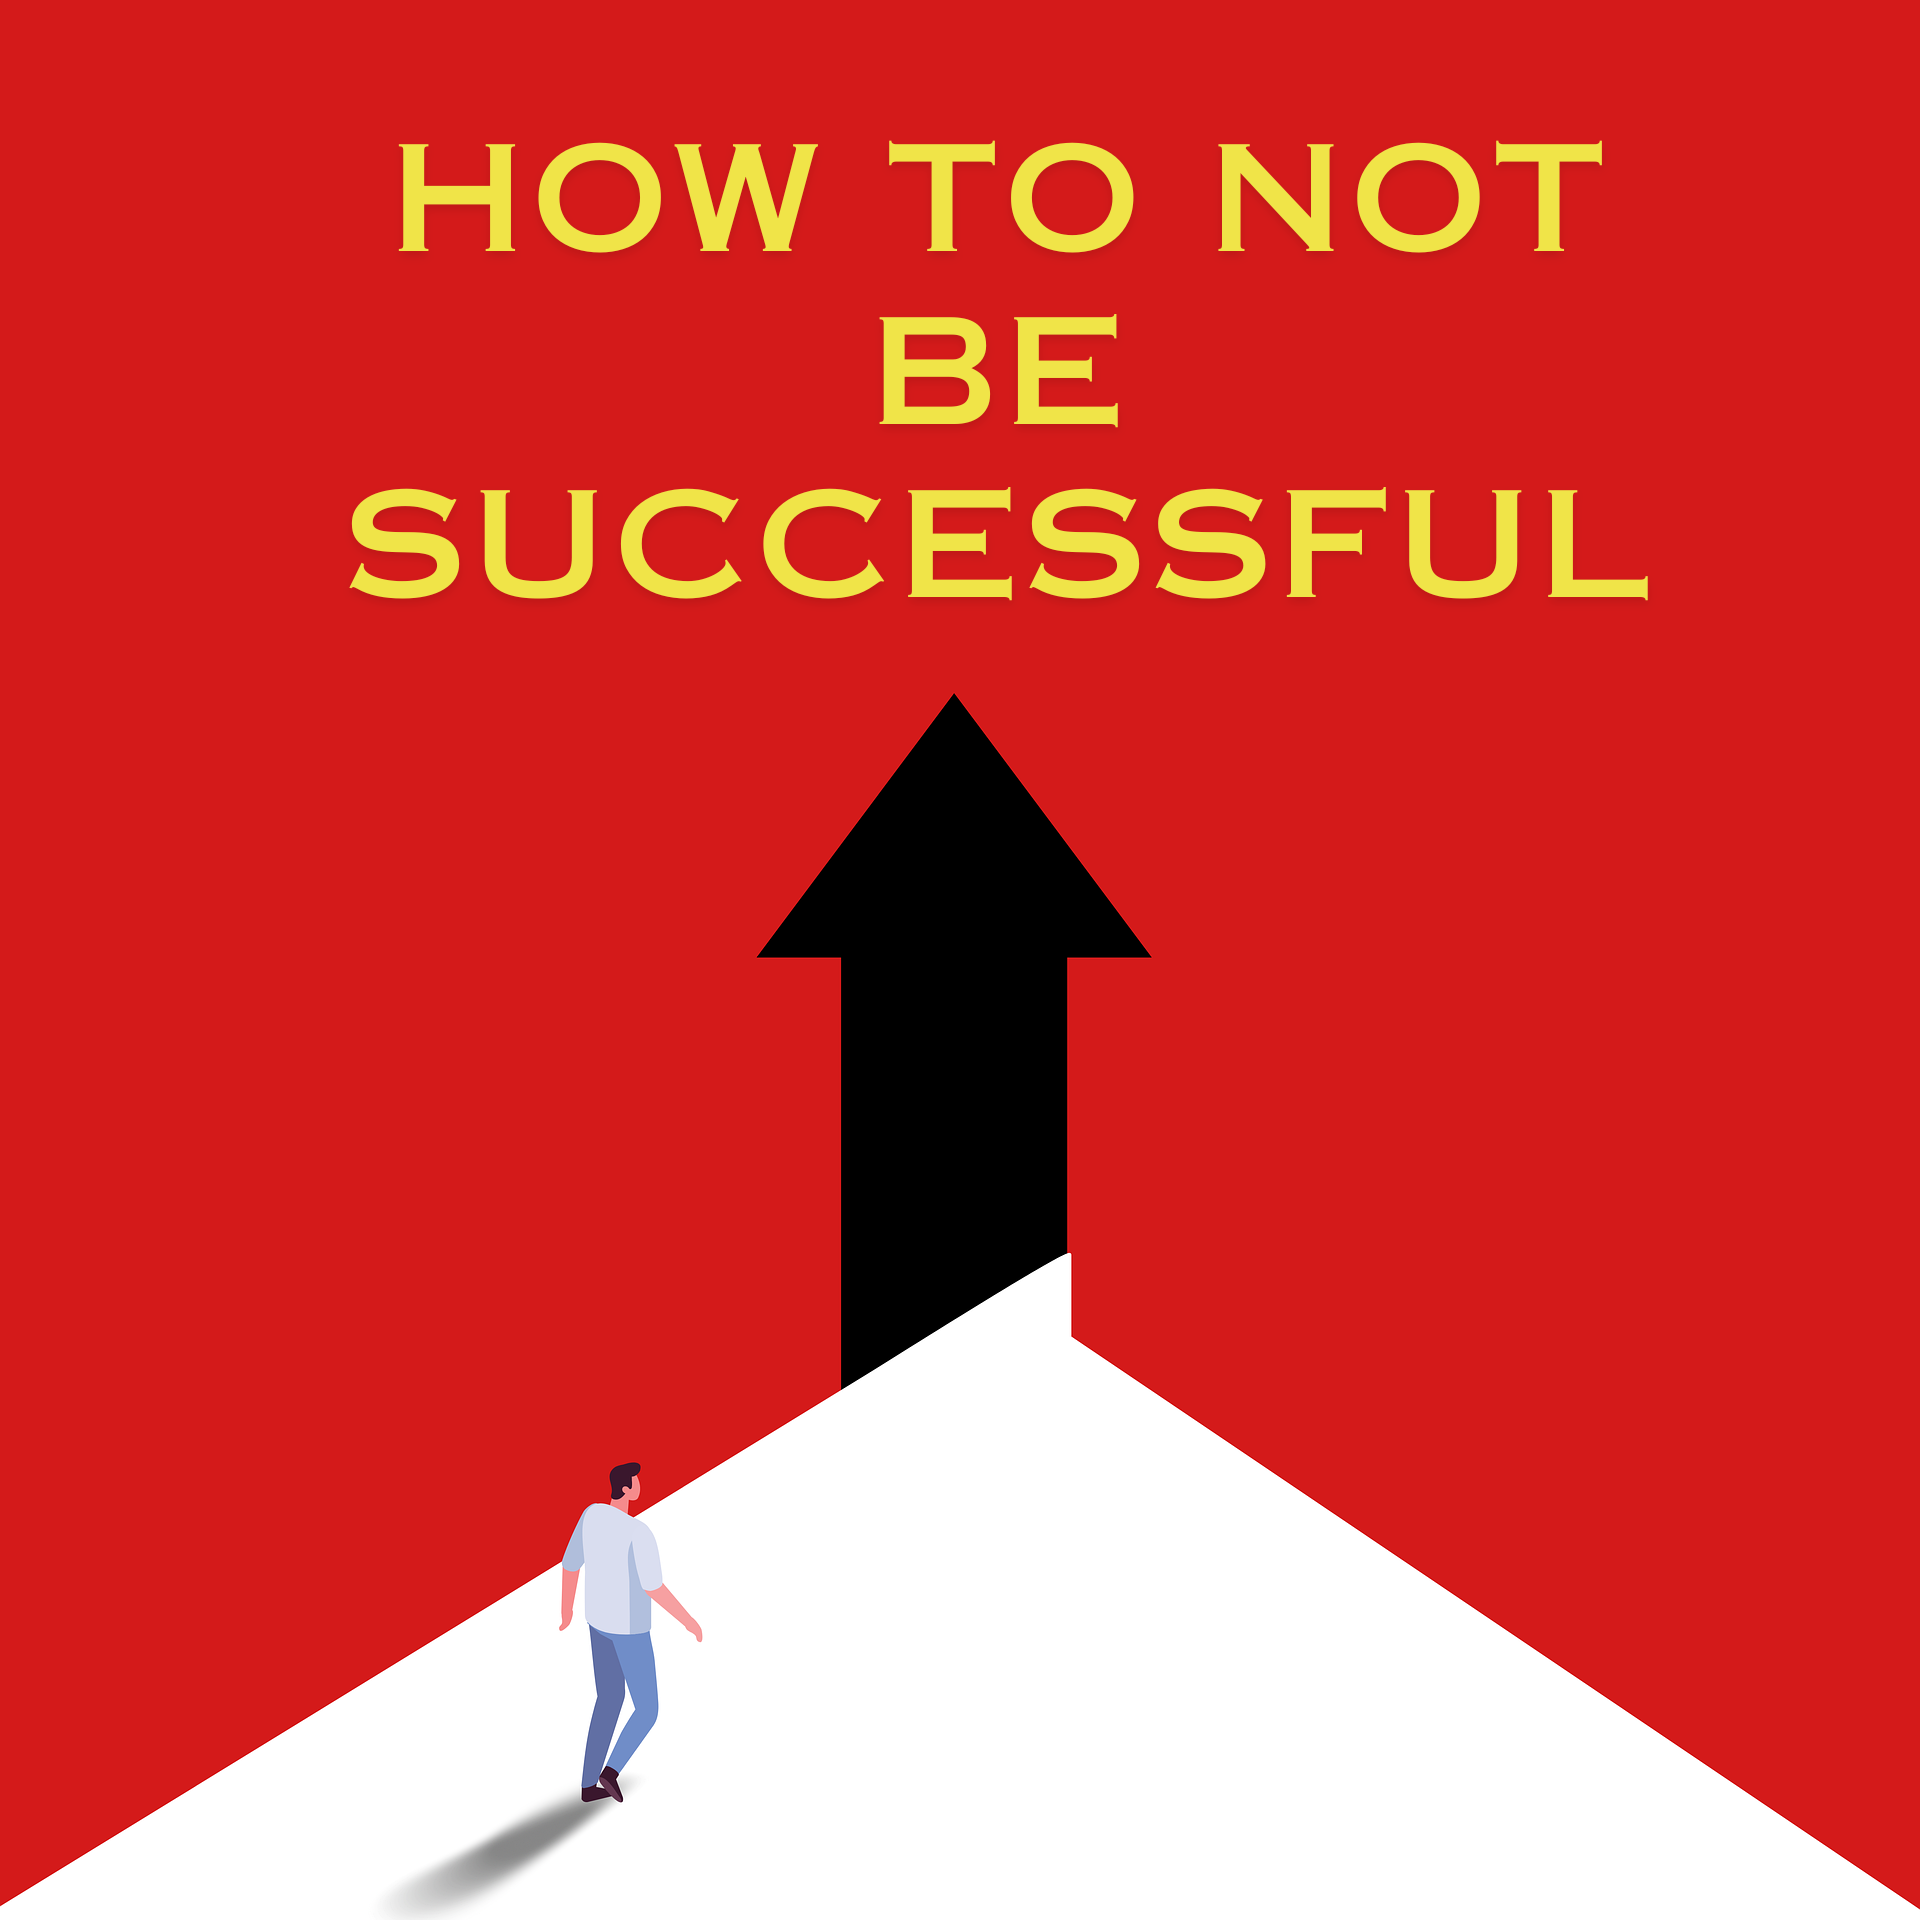 How to Not be Successful